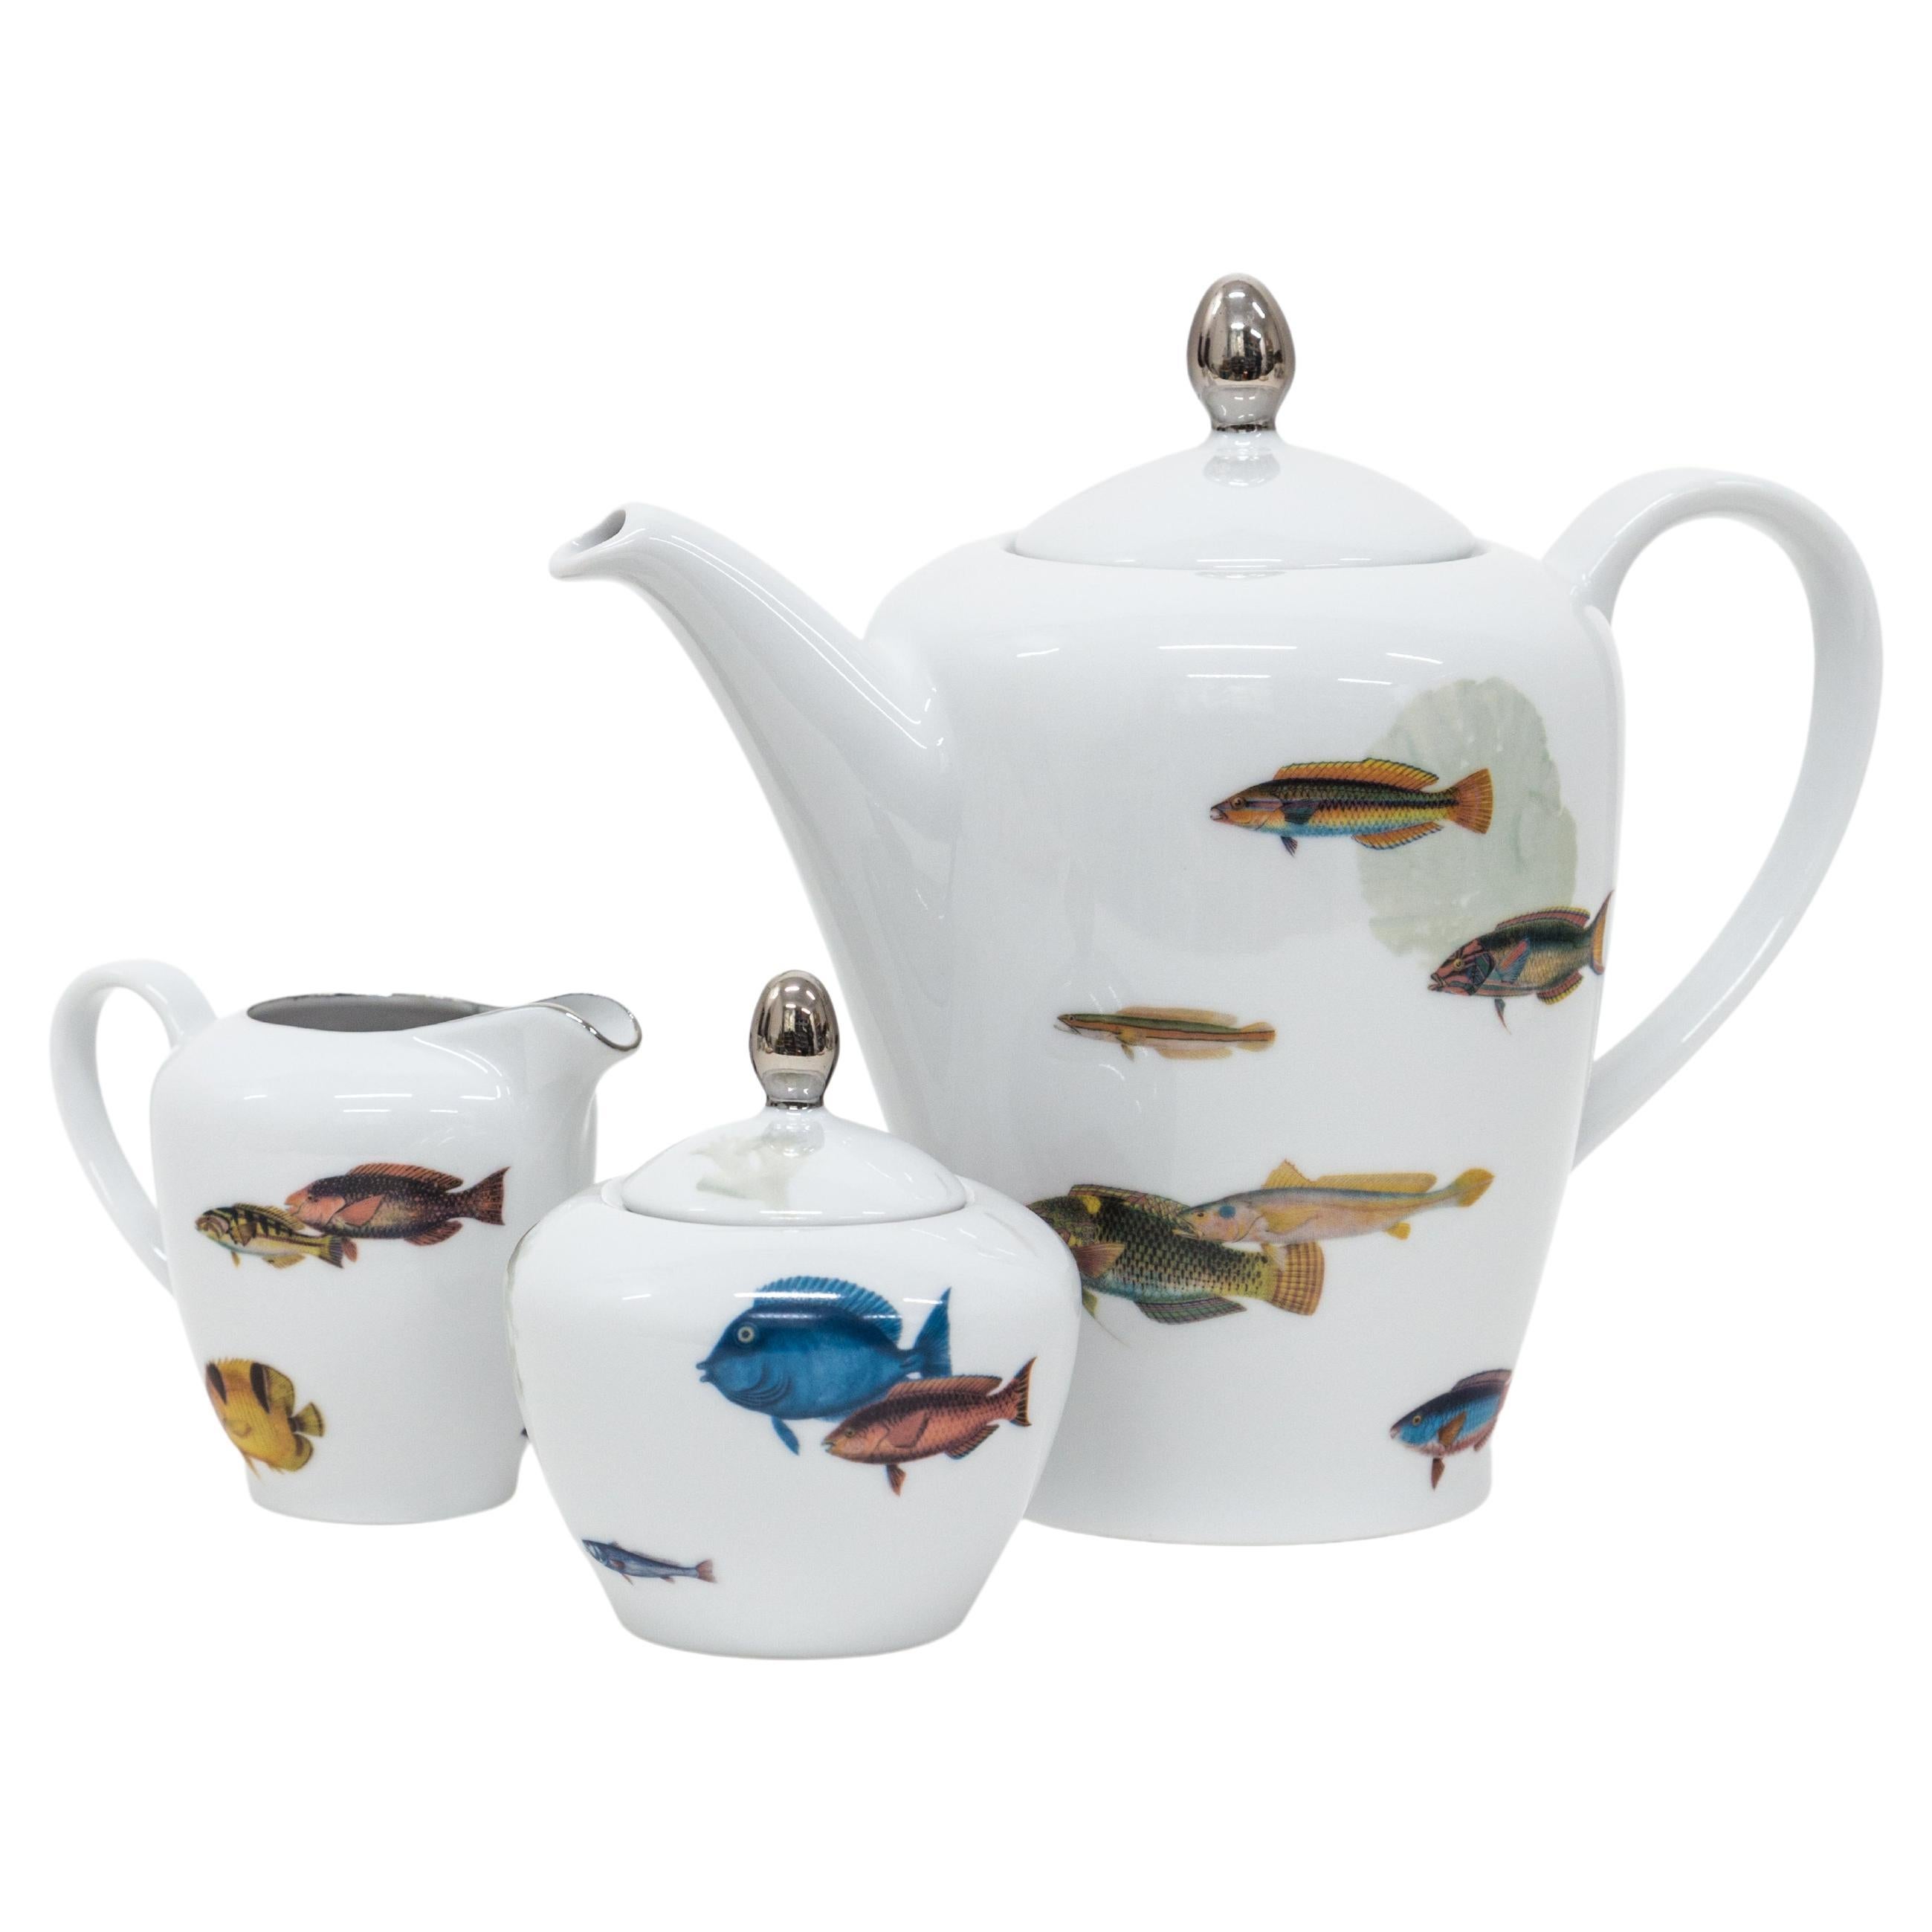 Amami, Contemporary Decorated Porcelain Tea Time Set by Vito Nesta For Sale